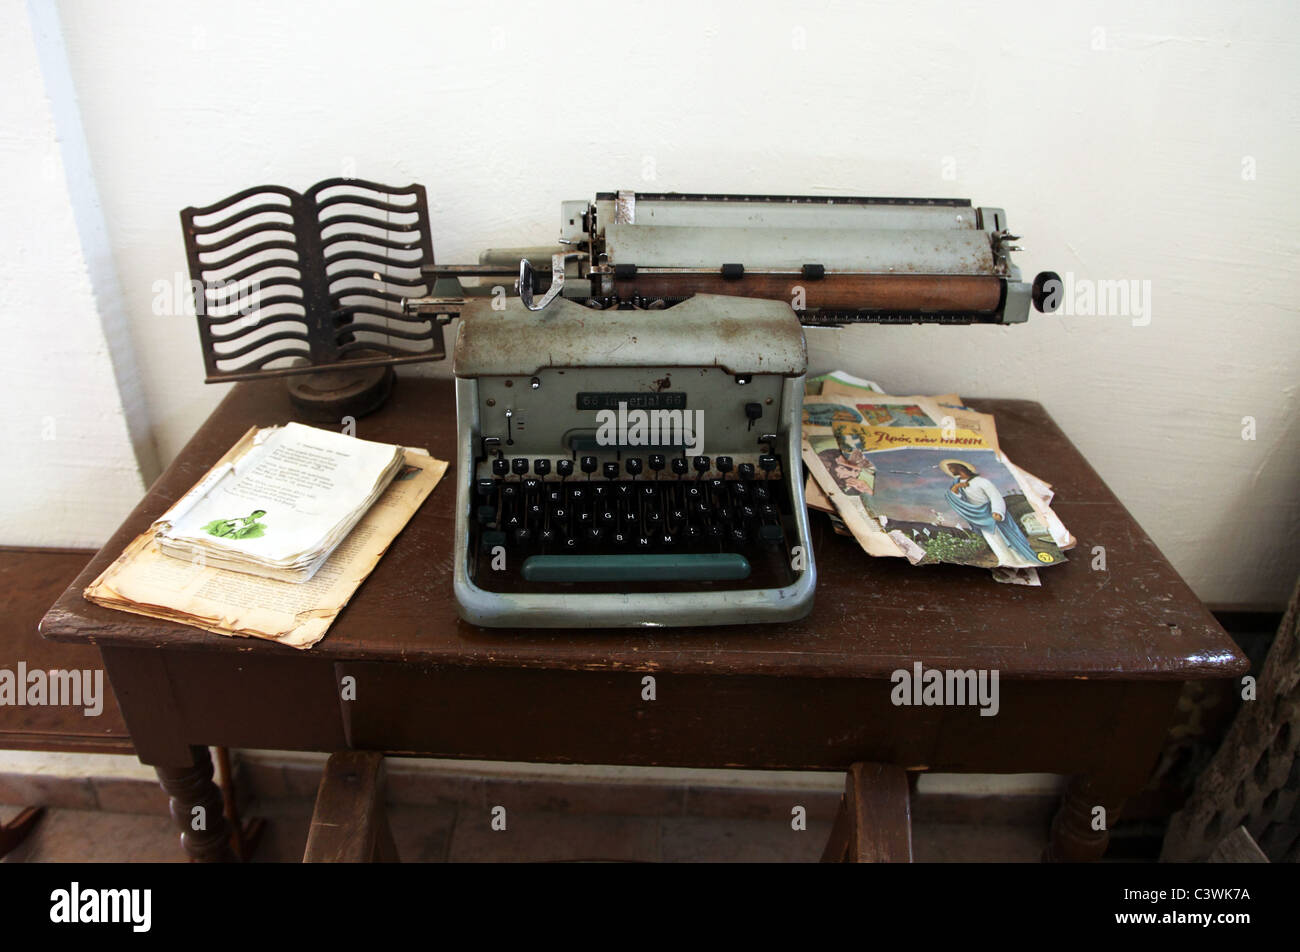 Imperial typewriter on display in the Camel Farm museum, Cyprus Stock Photo